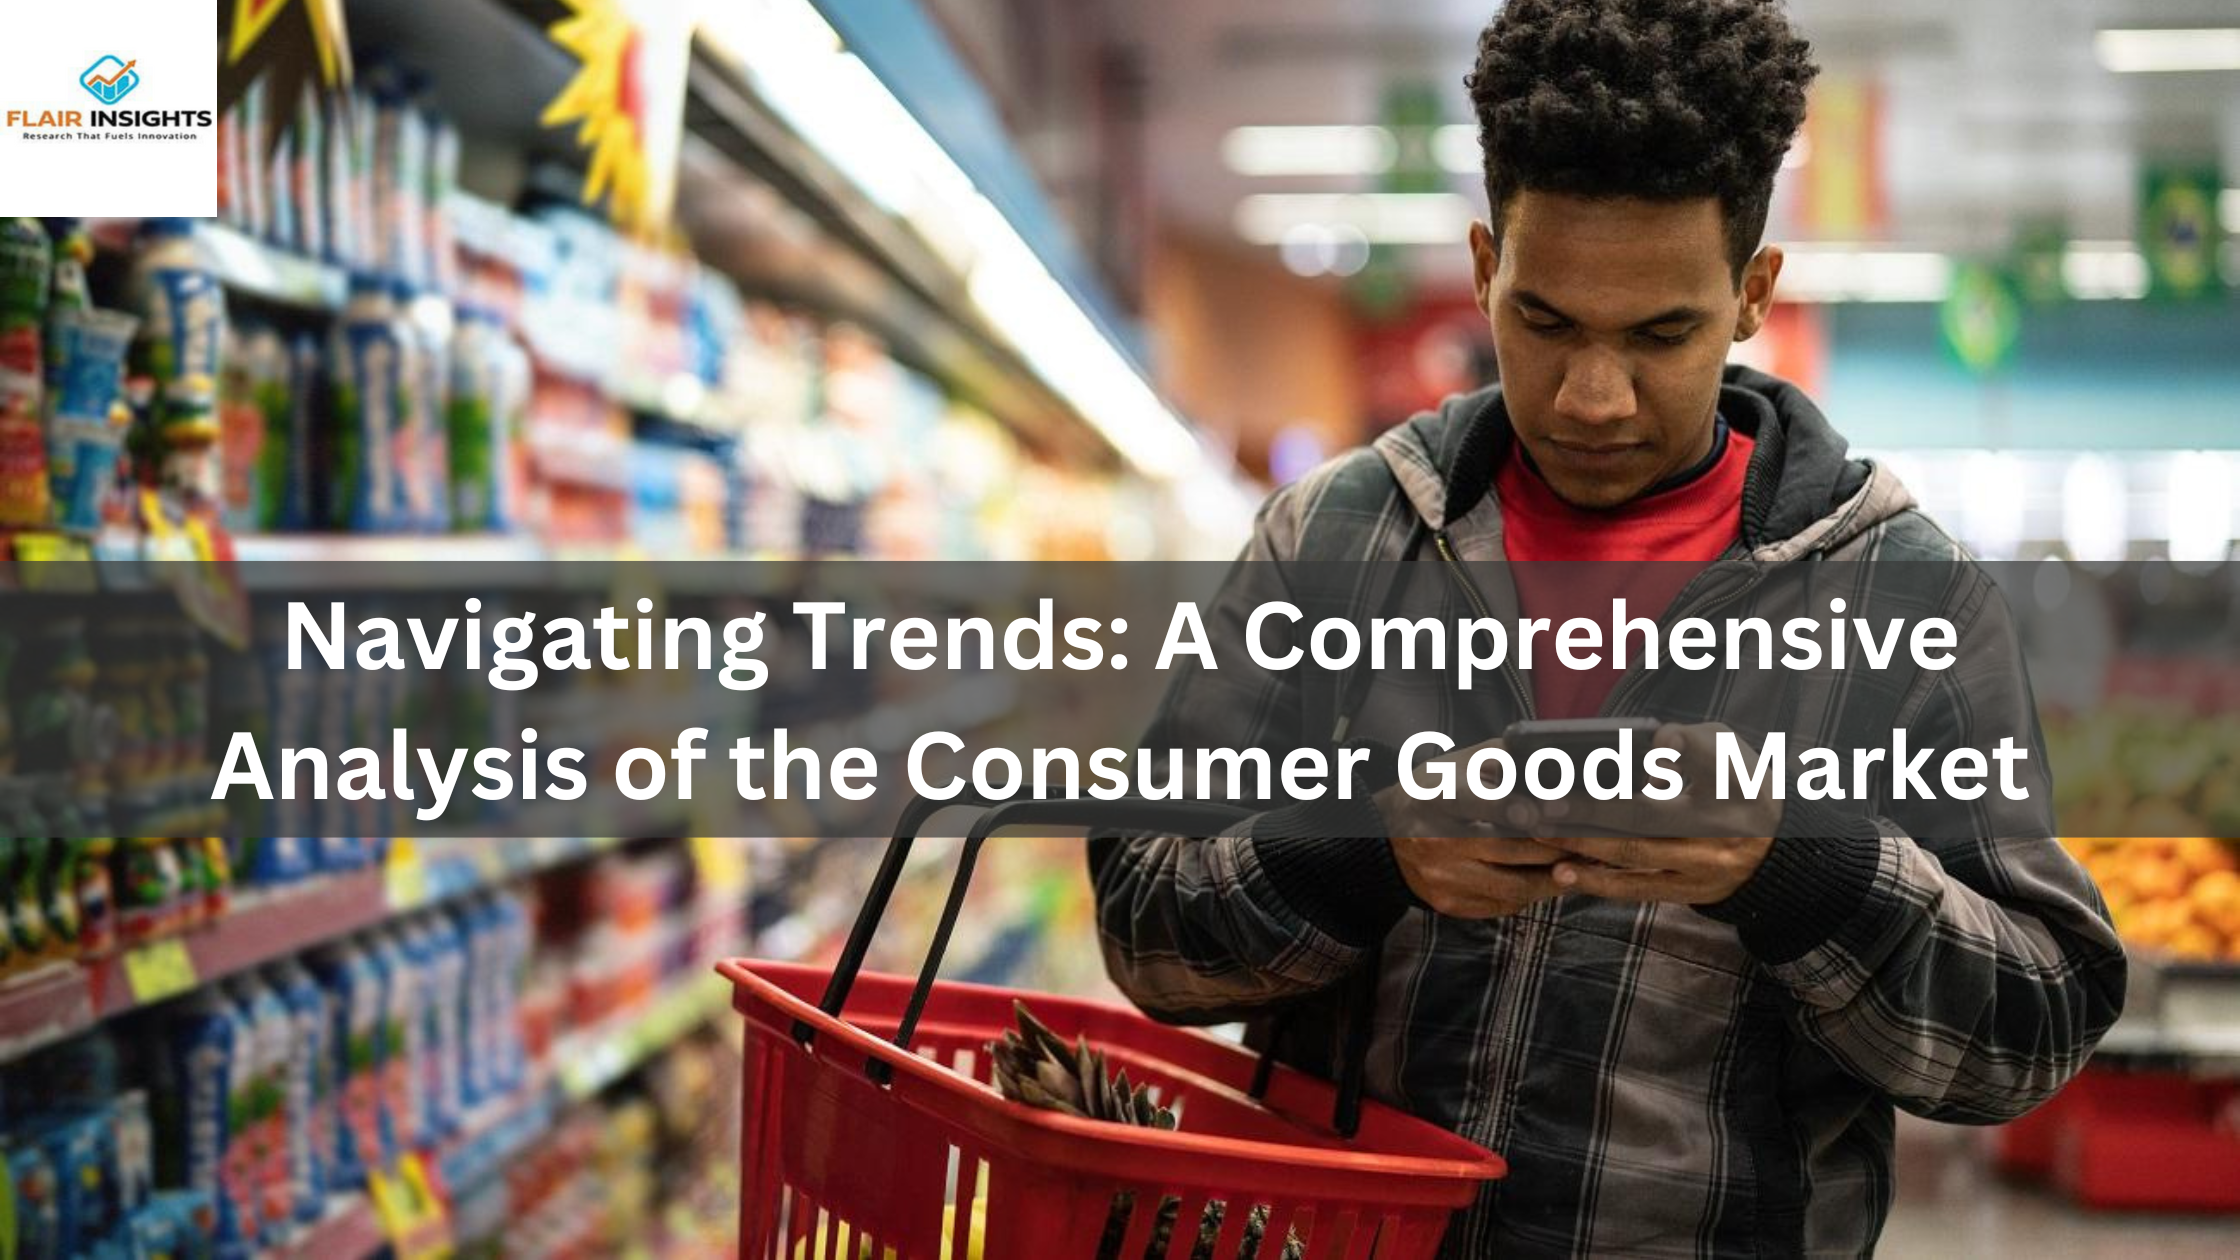 Navigating Trends: A Comprehensive Analysis of the Consumer Goods Market